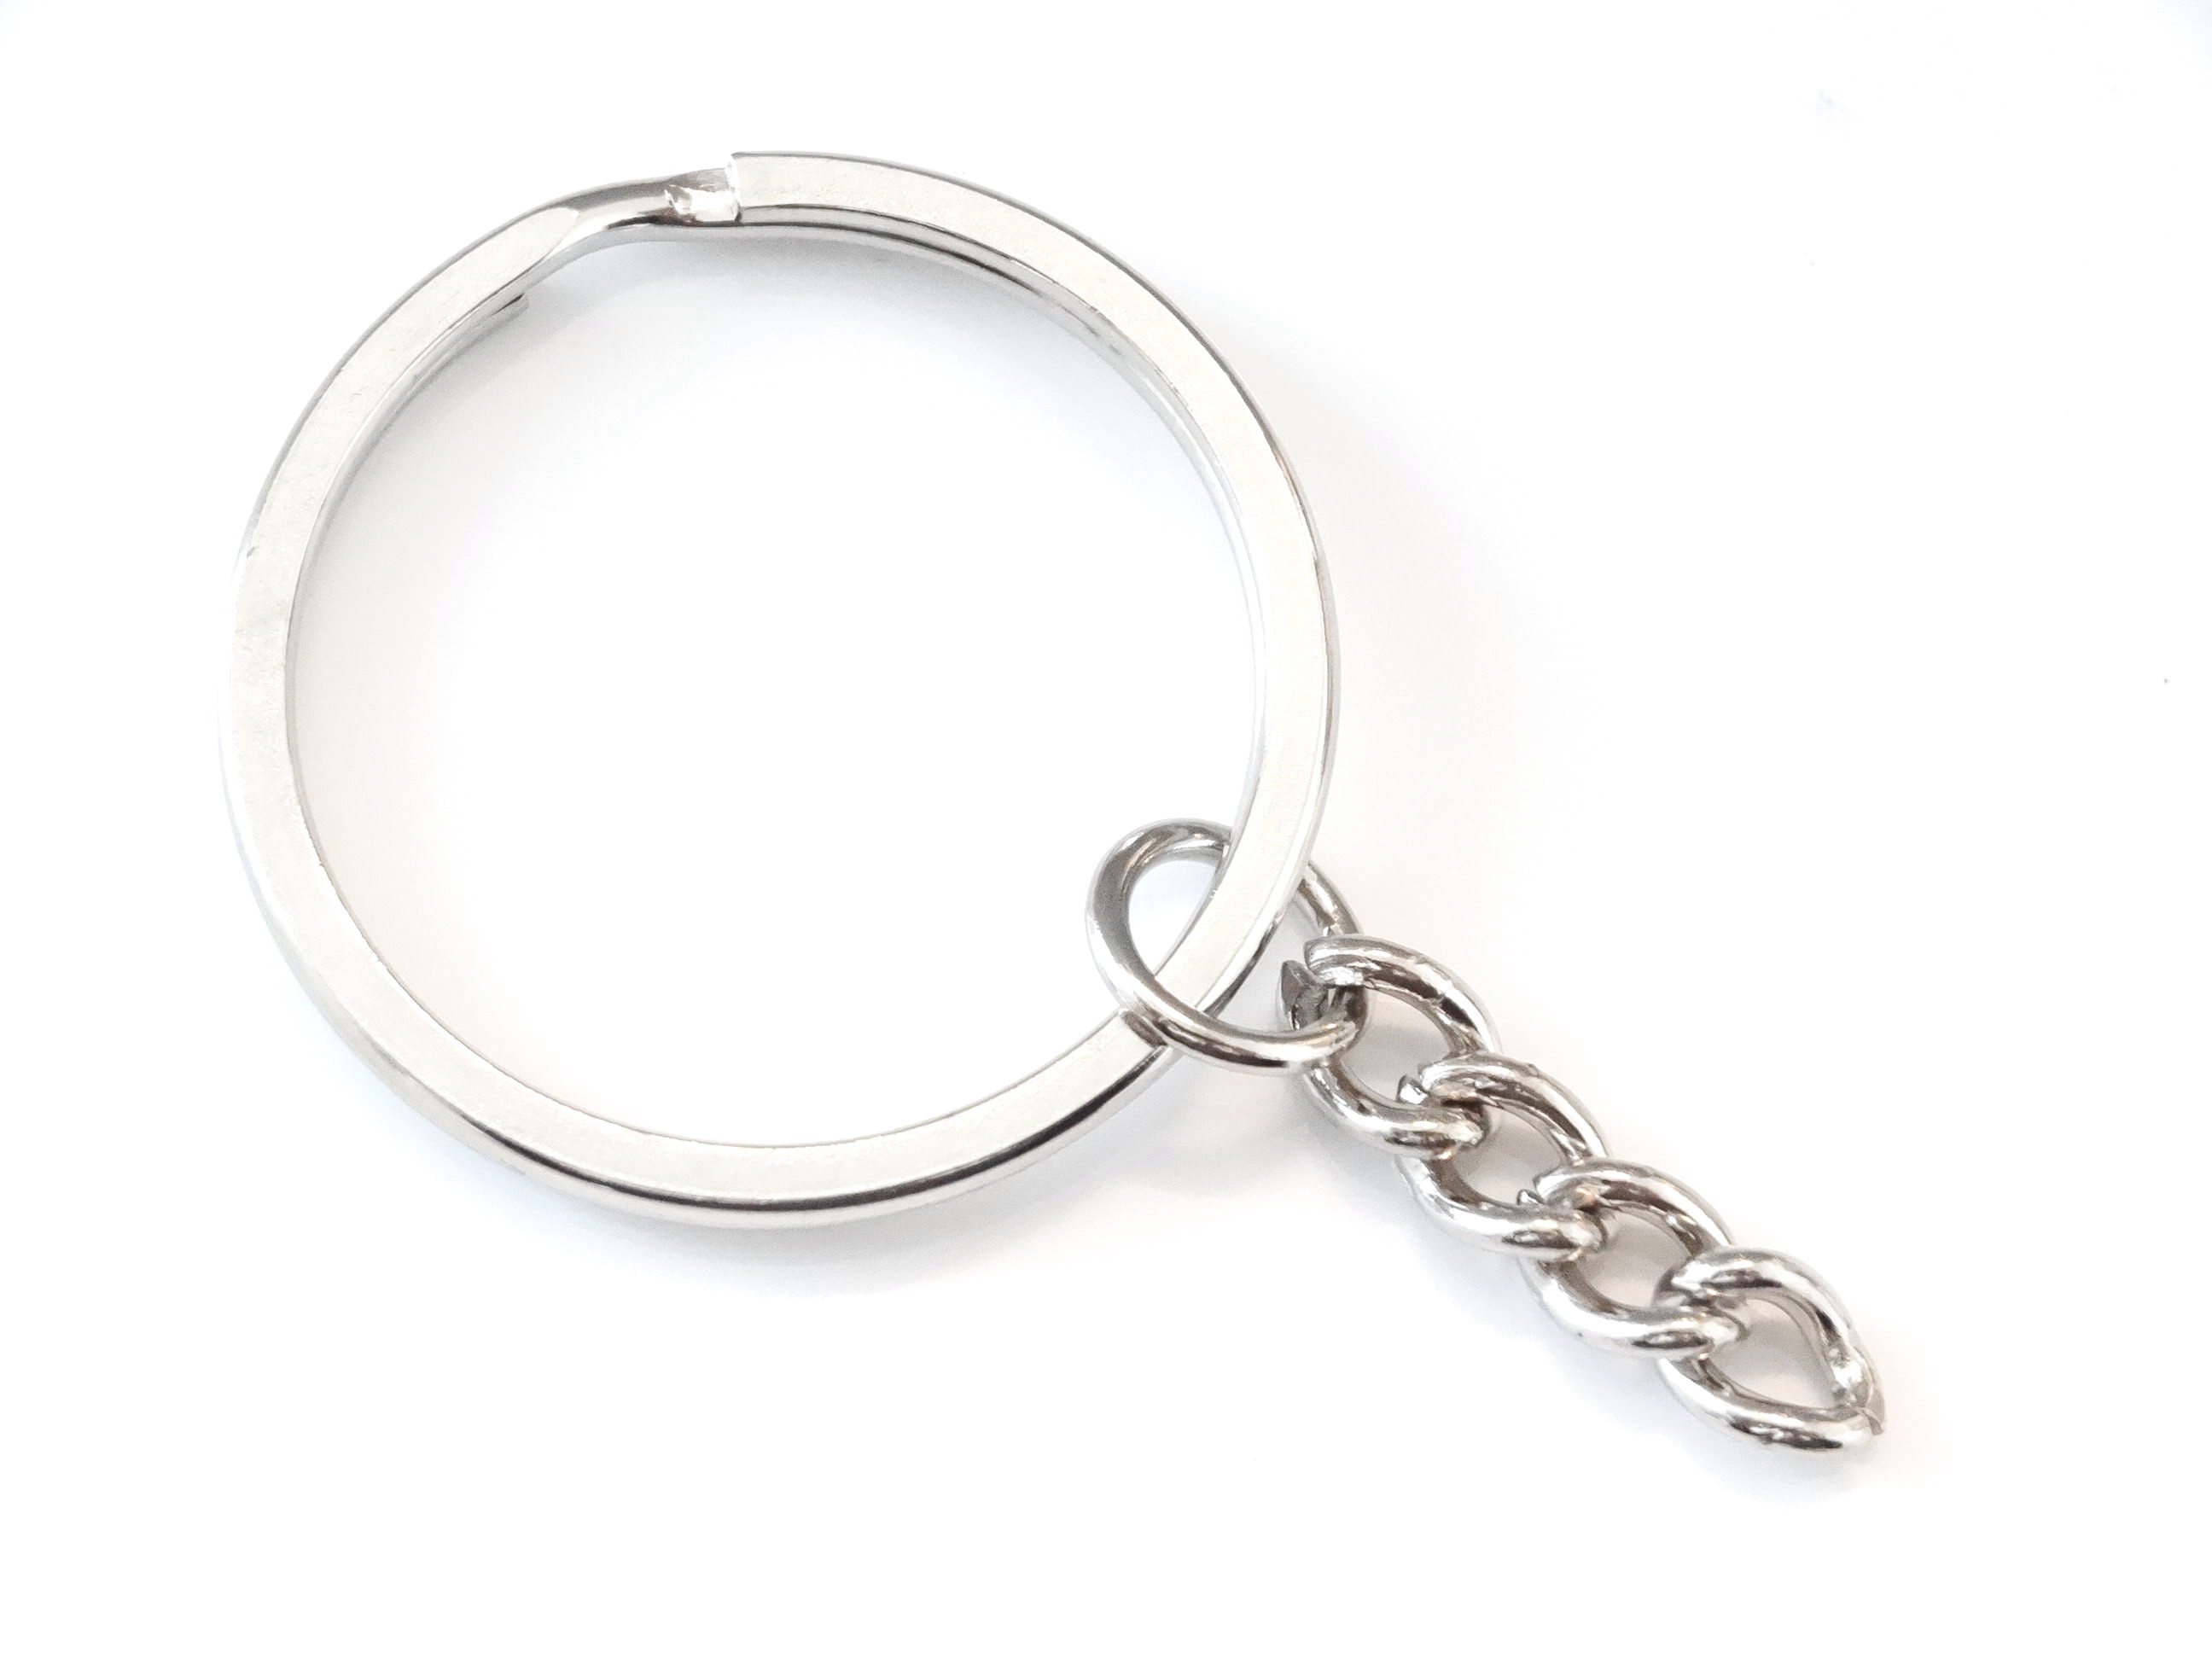 Metal Key Ring Keychain Split Ring with Chain 1 inch Pack of 50 ...